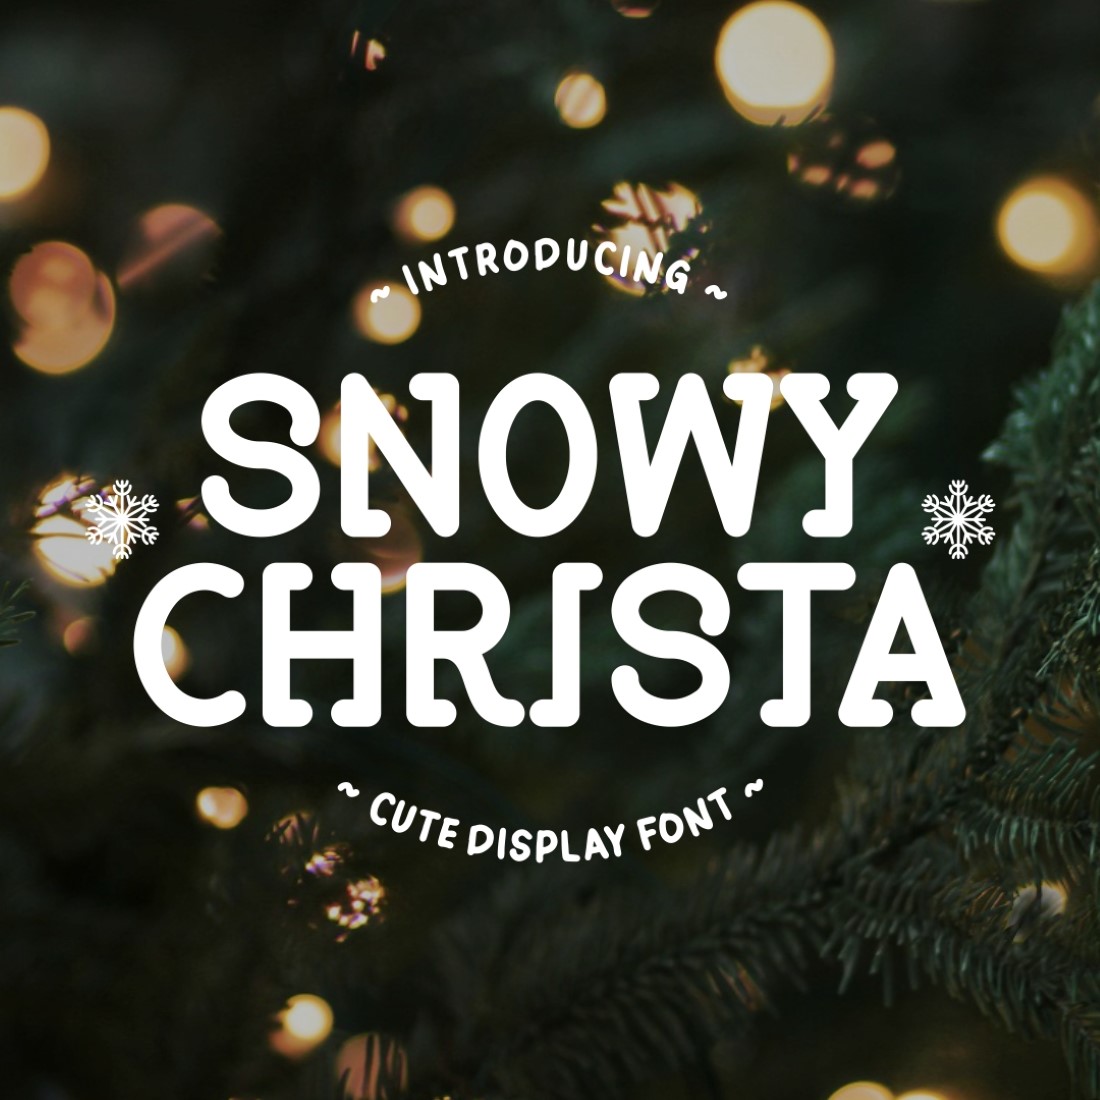 Snowy Christa - Cute Display Font preview image.